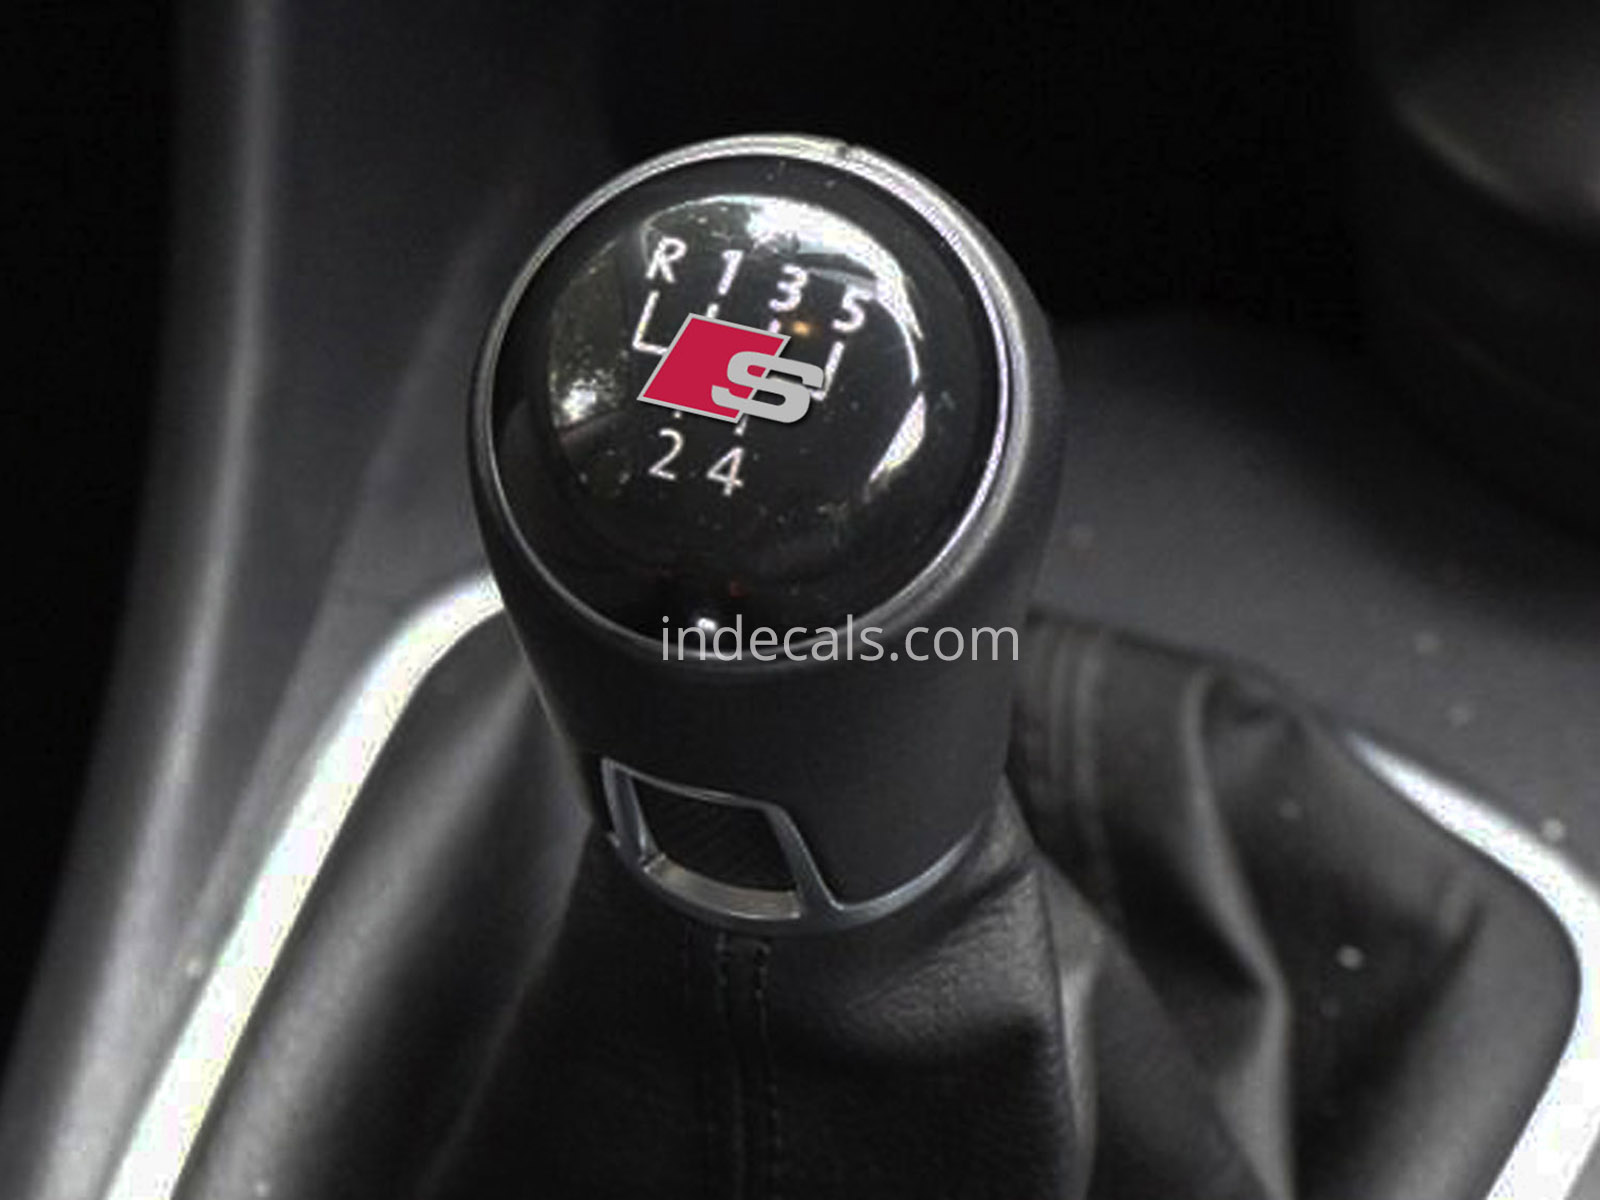 2 x Audi S-Line Stickers for Gear Knob - Silver + Red